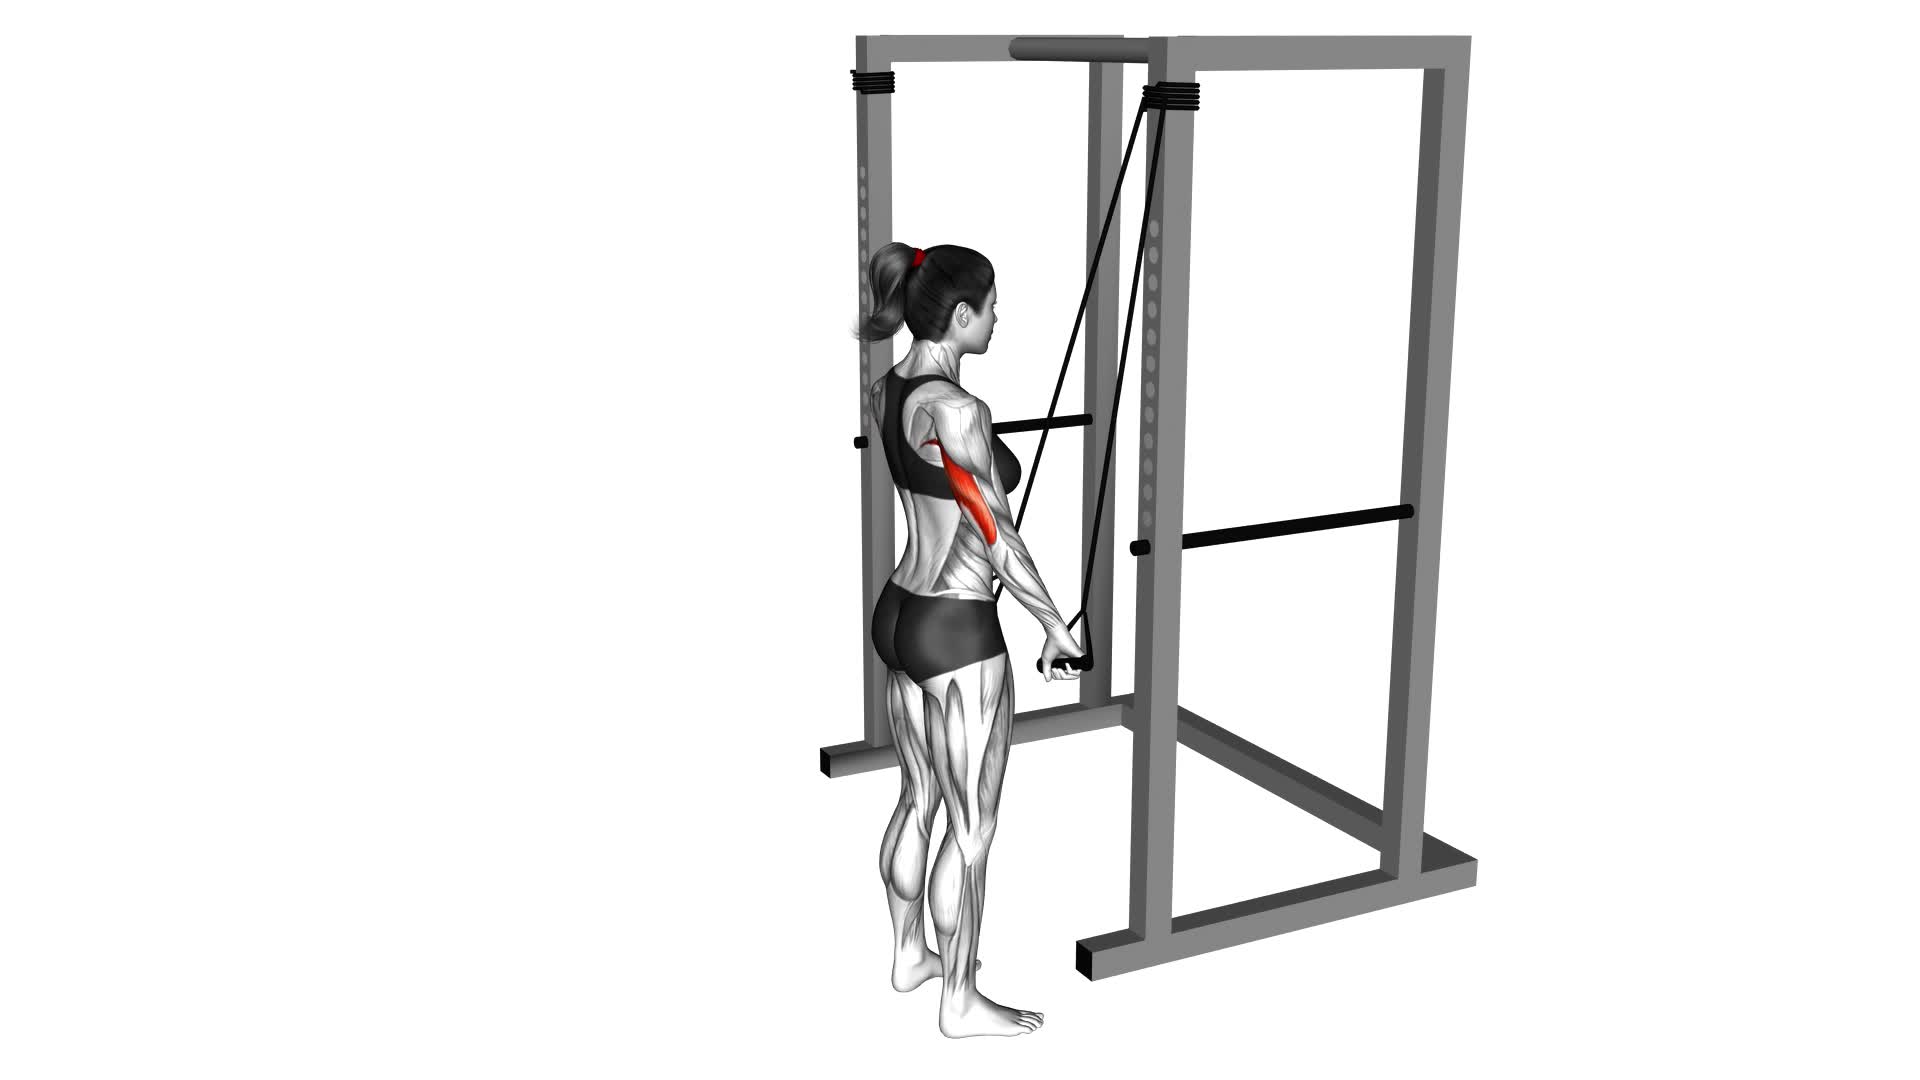 Band Pushdown (Female) - Video Exercise Guide & Tips